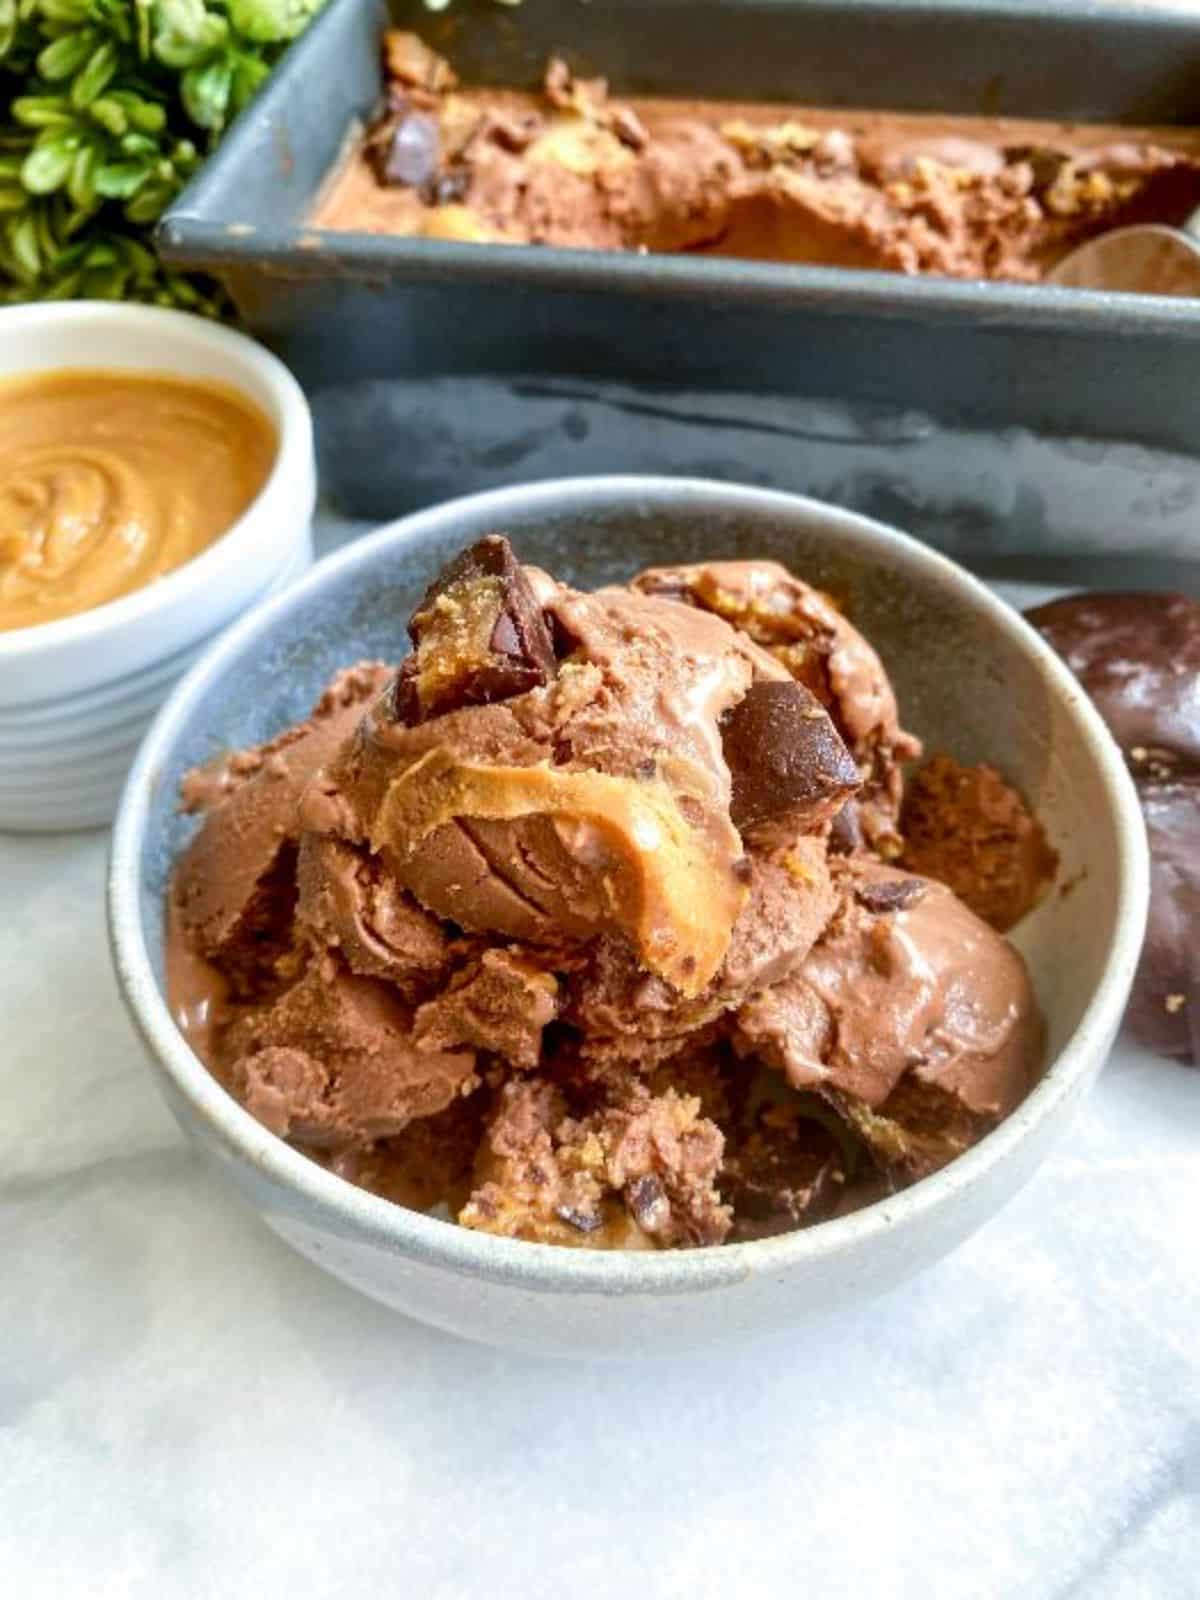 Chocolate Peanut Butter Protein Ice Cream in a gray bowl.